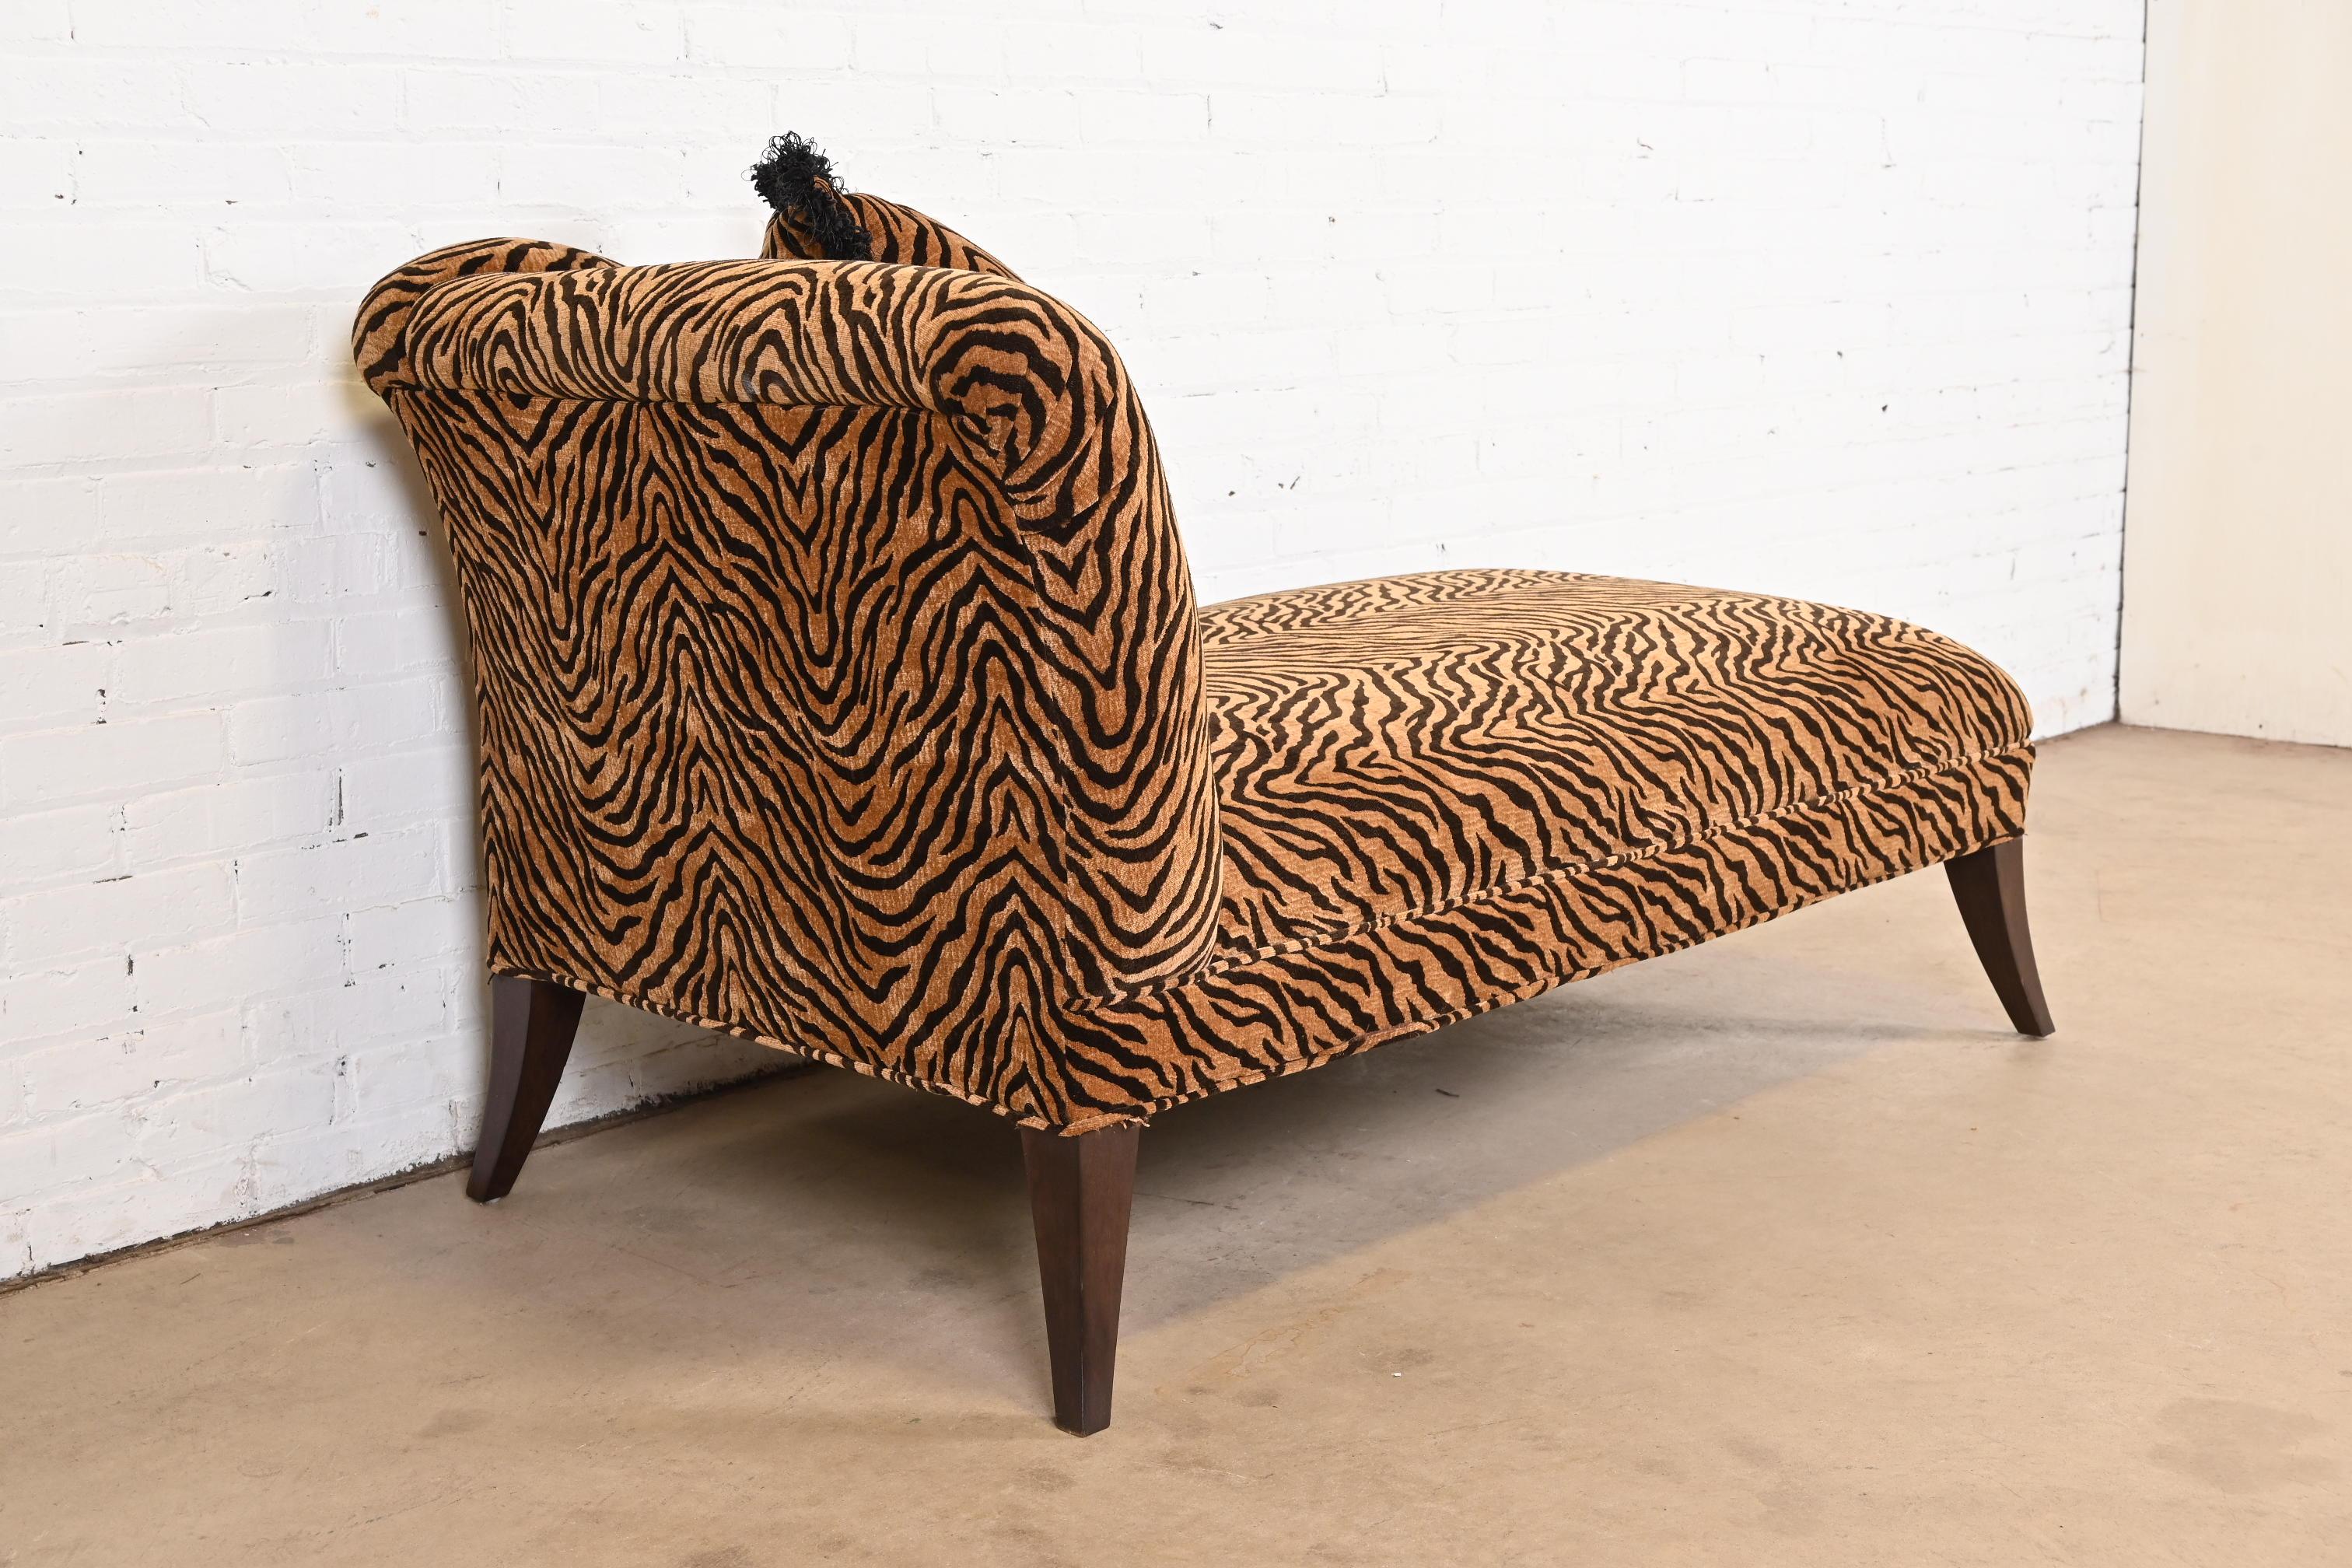 French Regency Tiger Print Upholstered Chaise Lounge In Good Condition For Sale In South Bend, IN